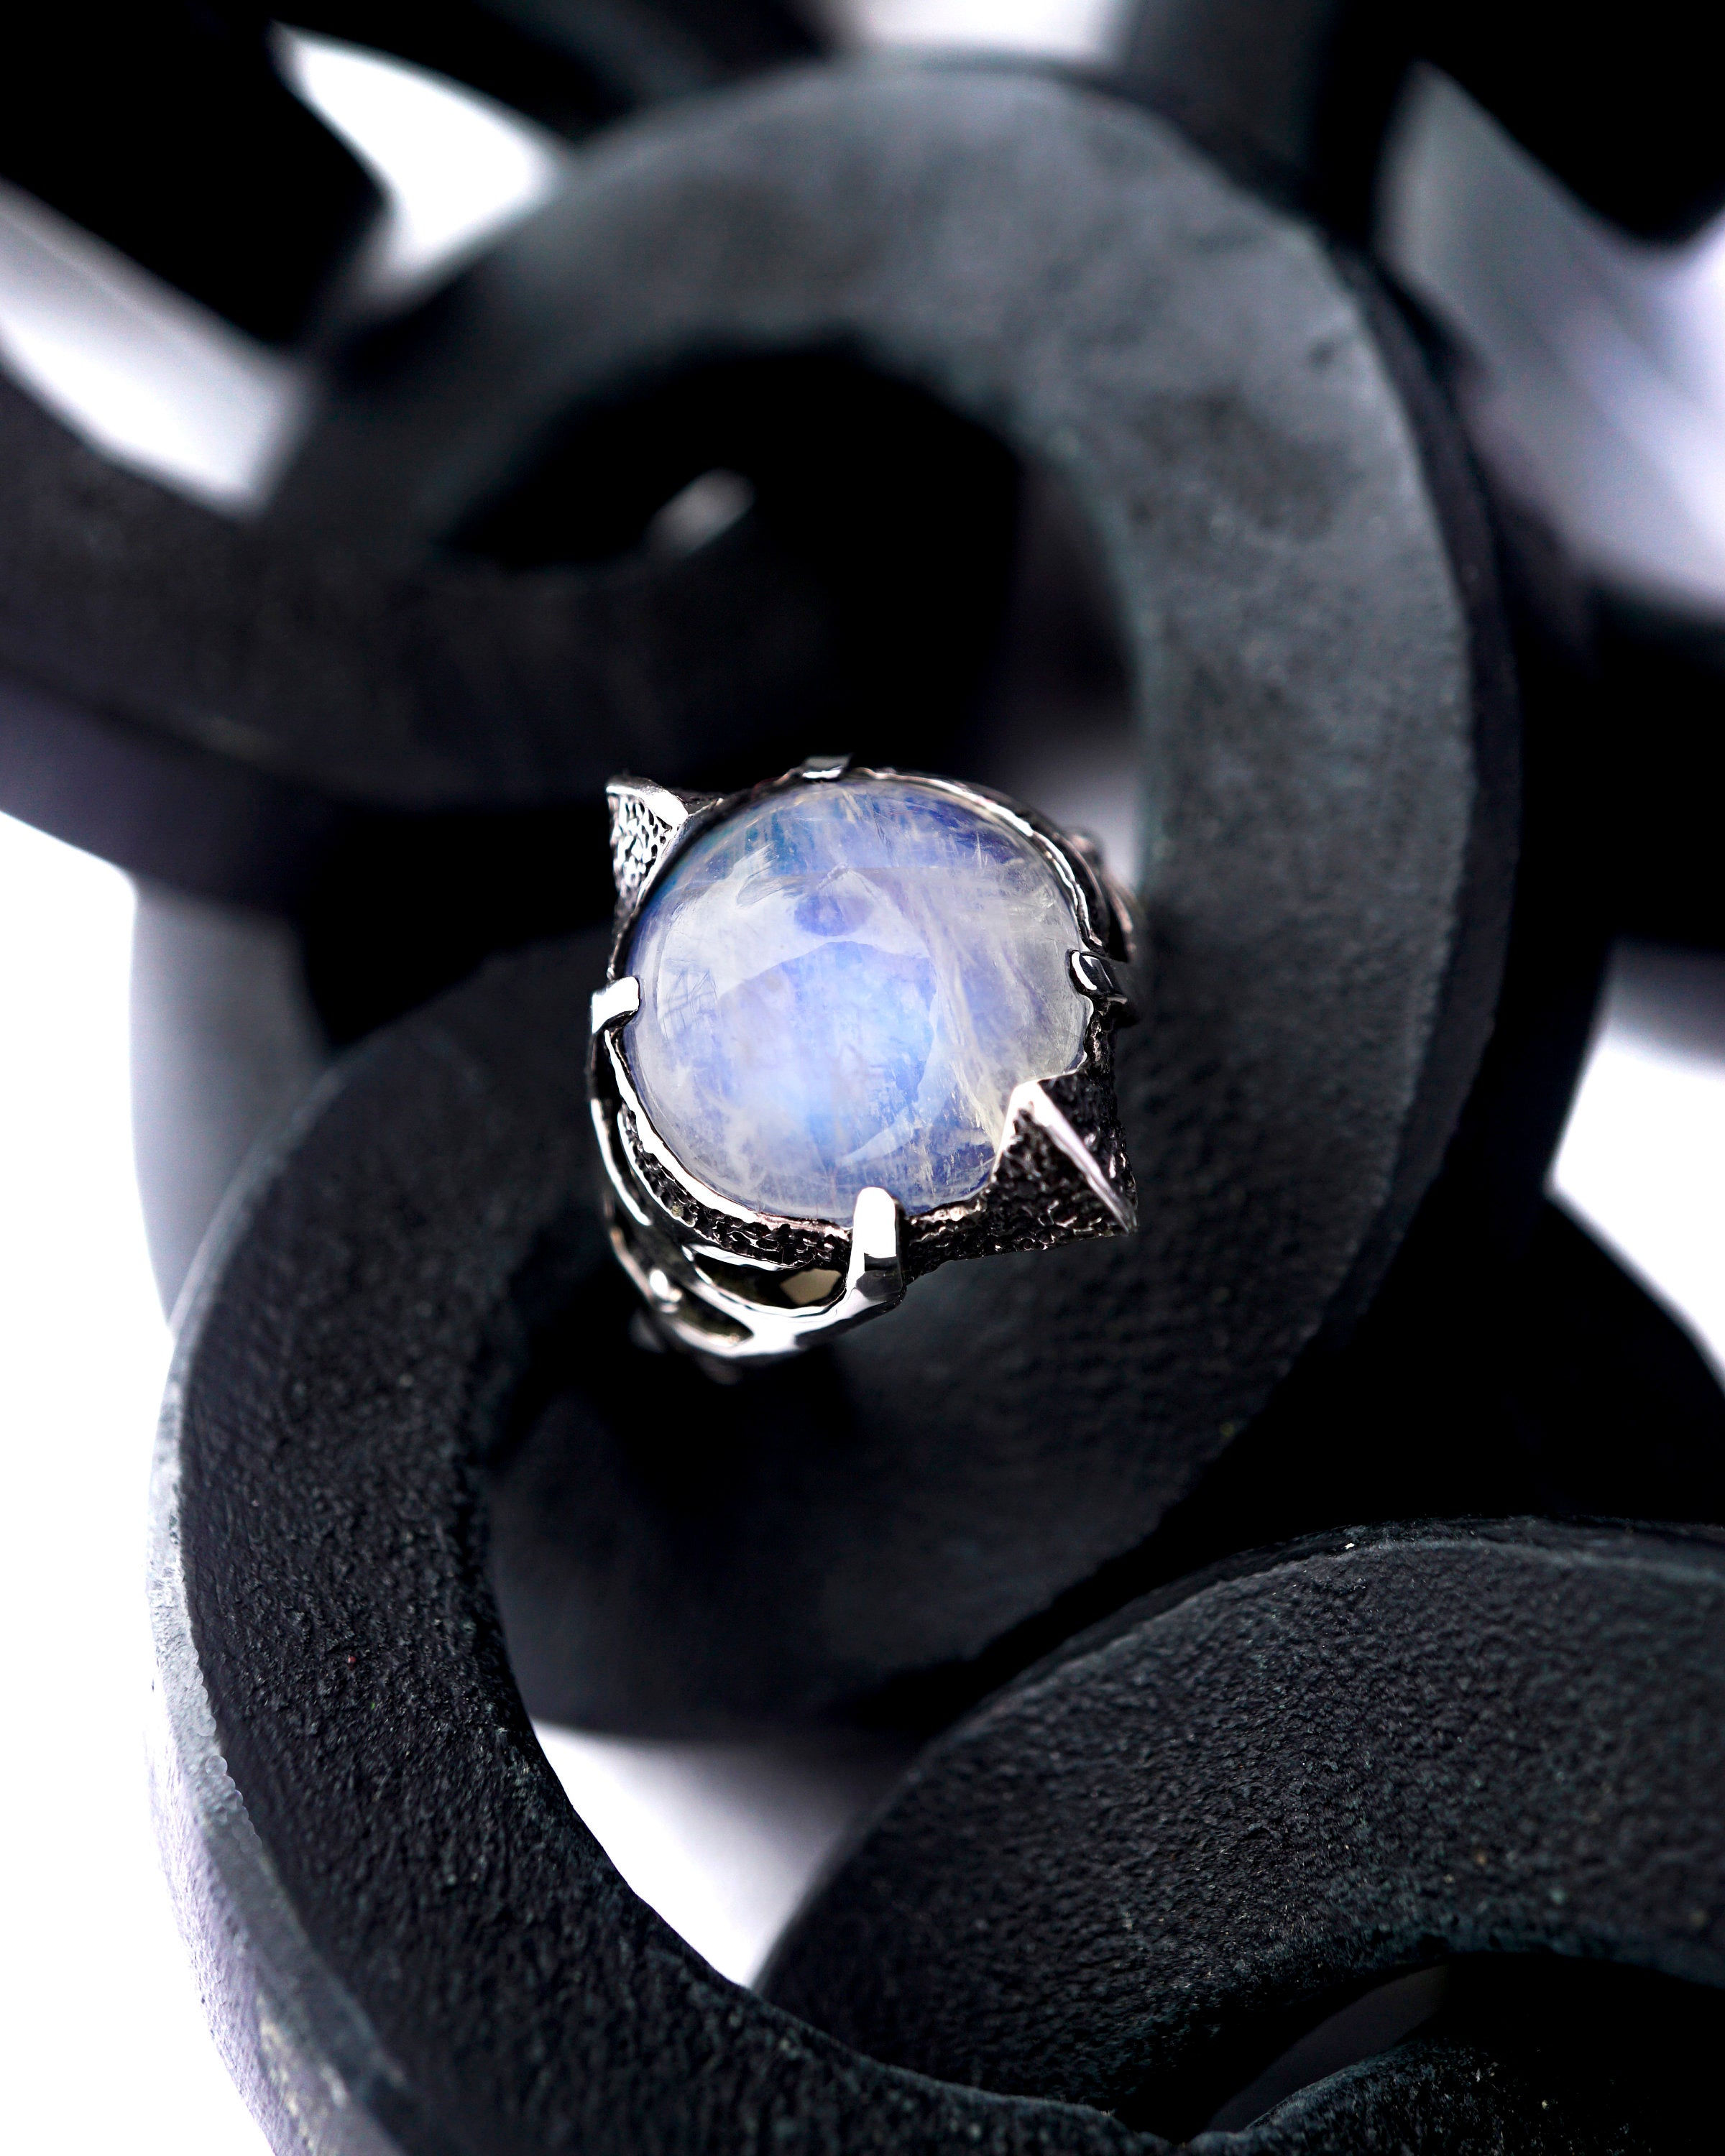 Large Moonstone ring, Moonstone signet rings, June birthstone ring, Unique ring, Statement ring, Sterling silver moonstone ring, 